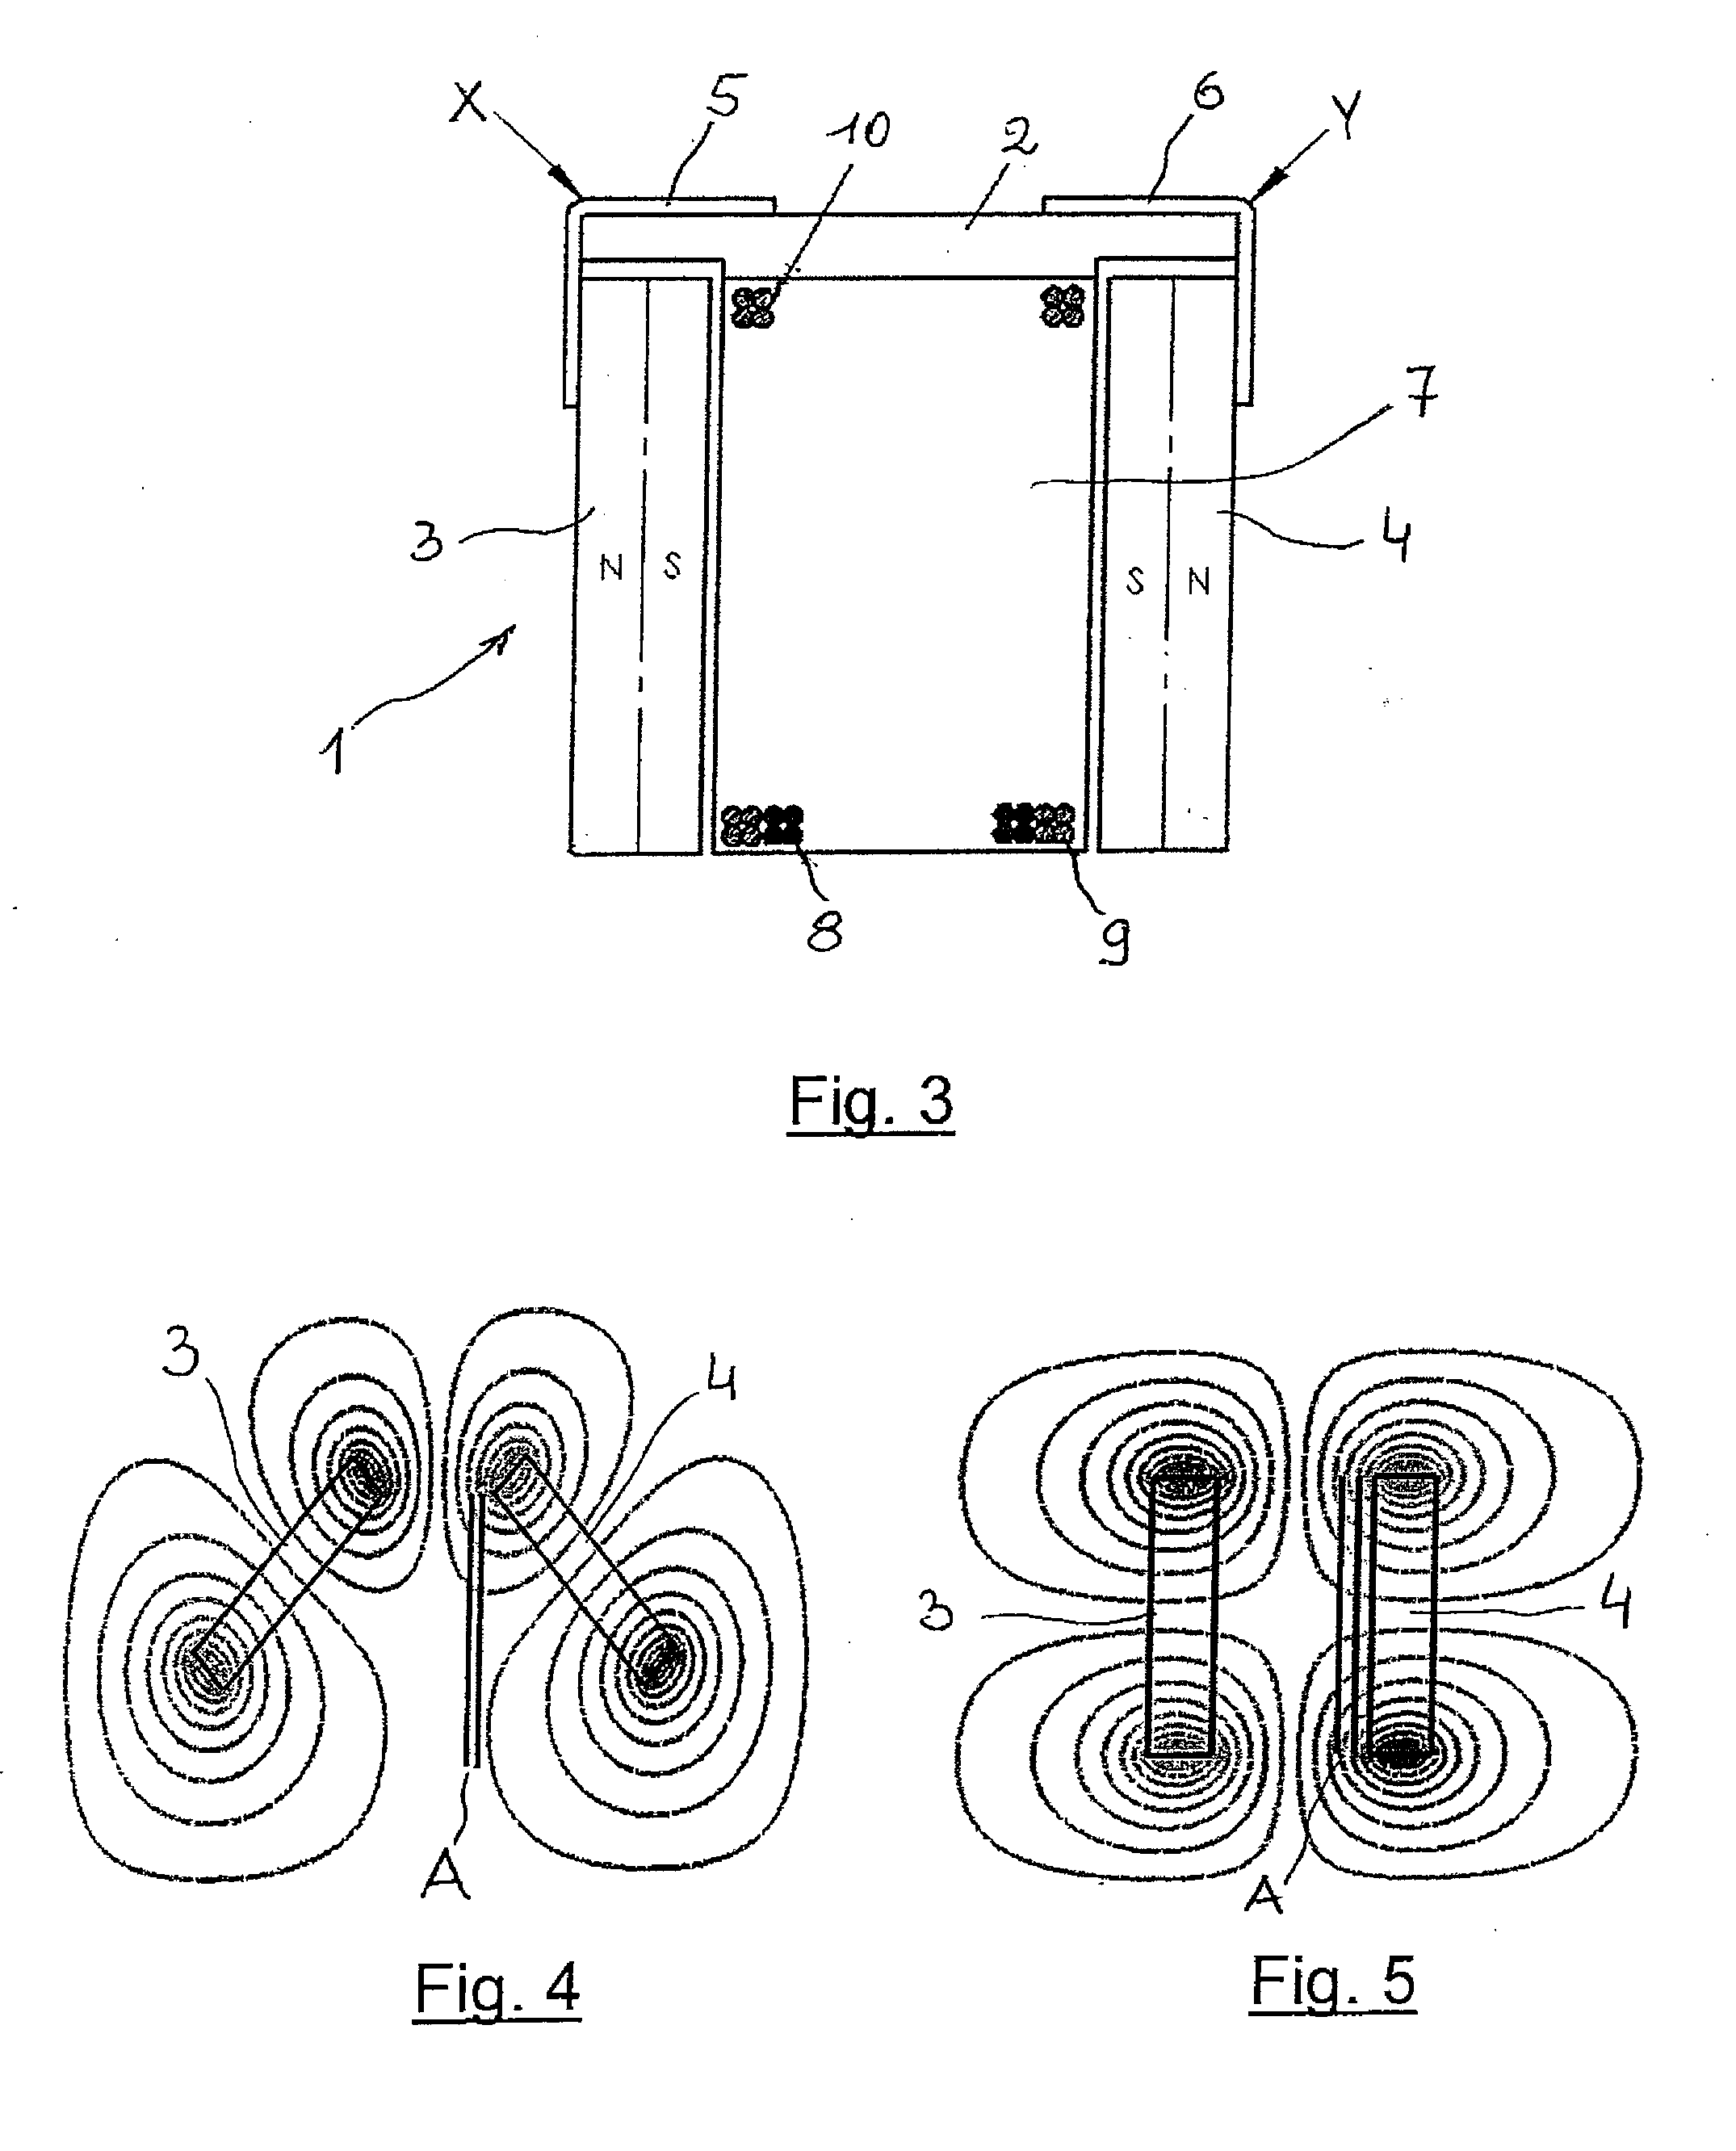 Miniaturized generator with oscillating magnets for the production of electric energy from vibrations